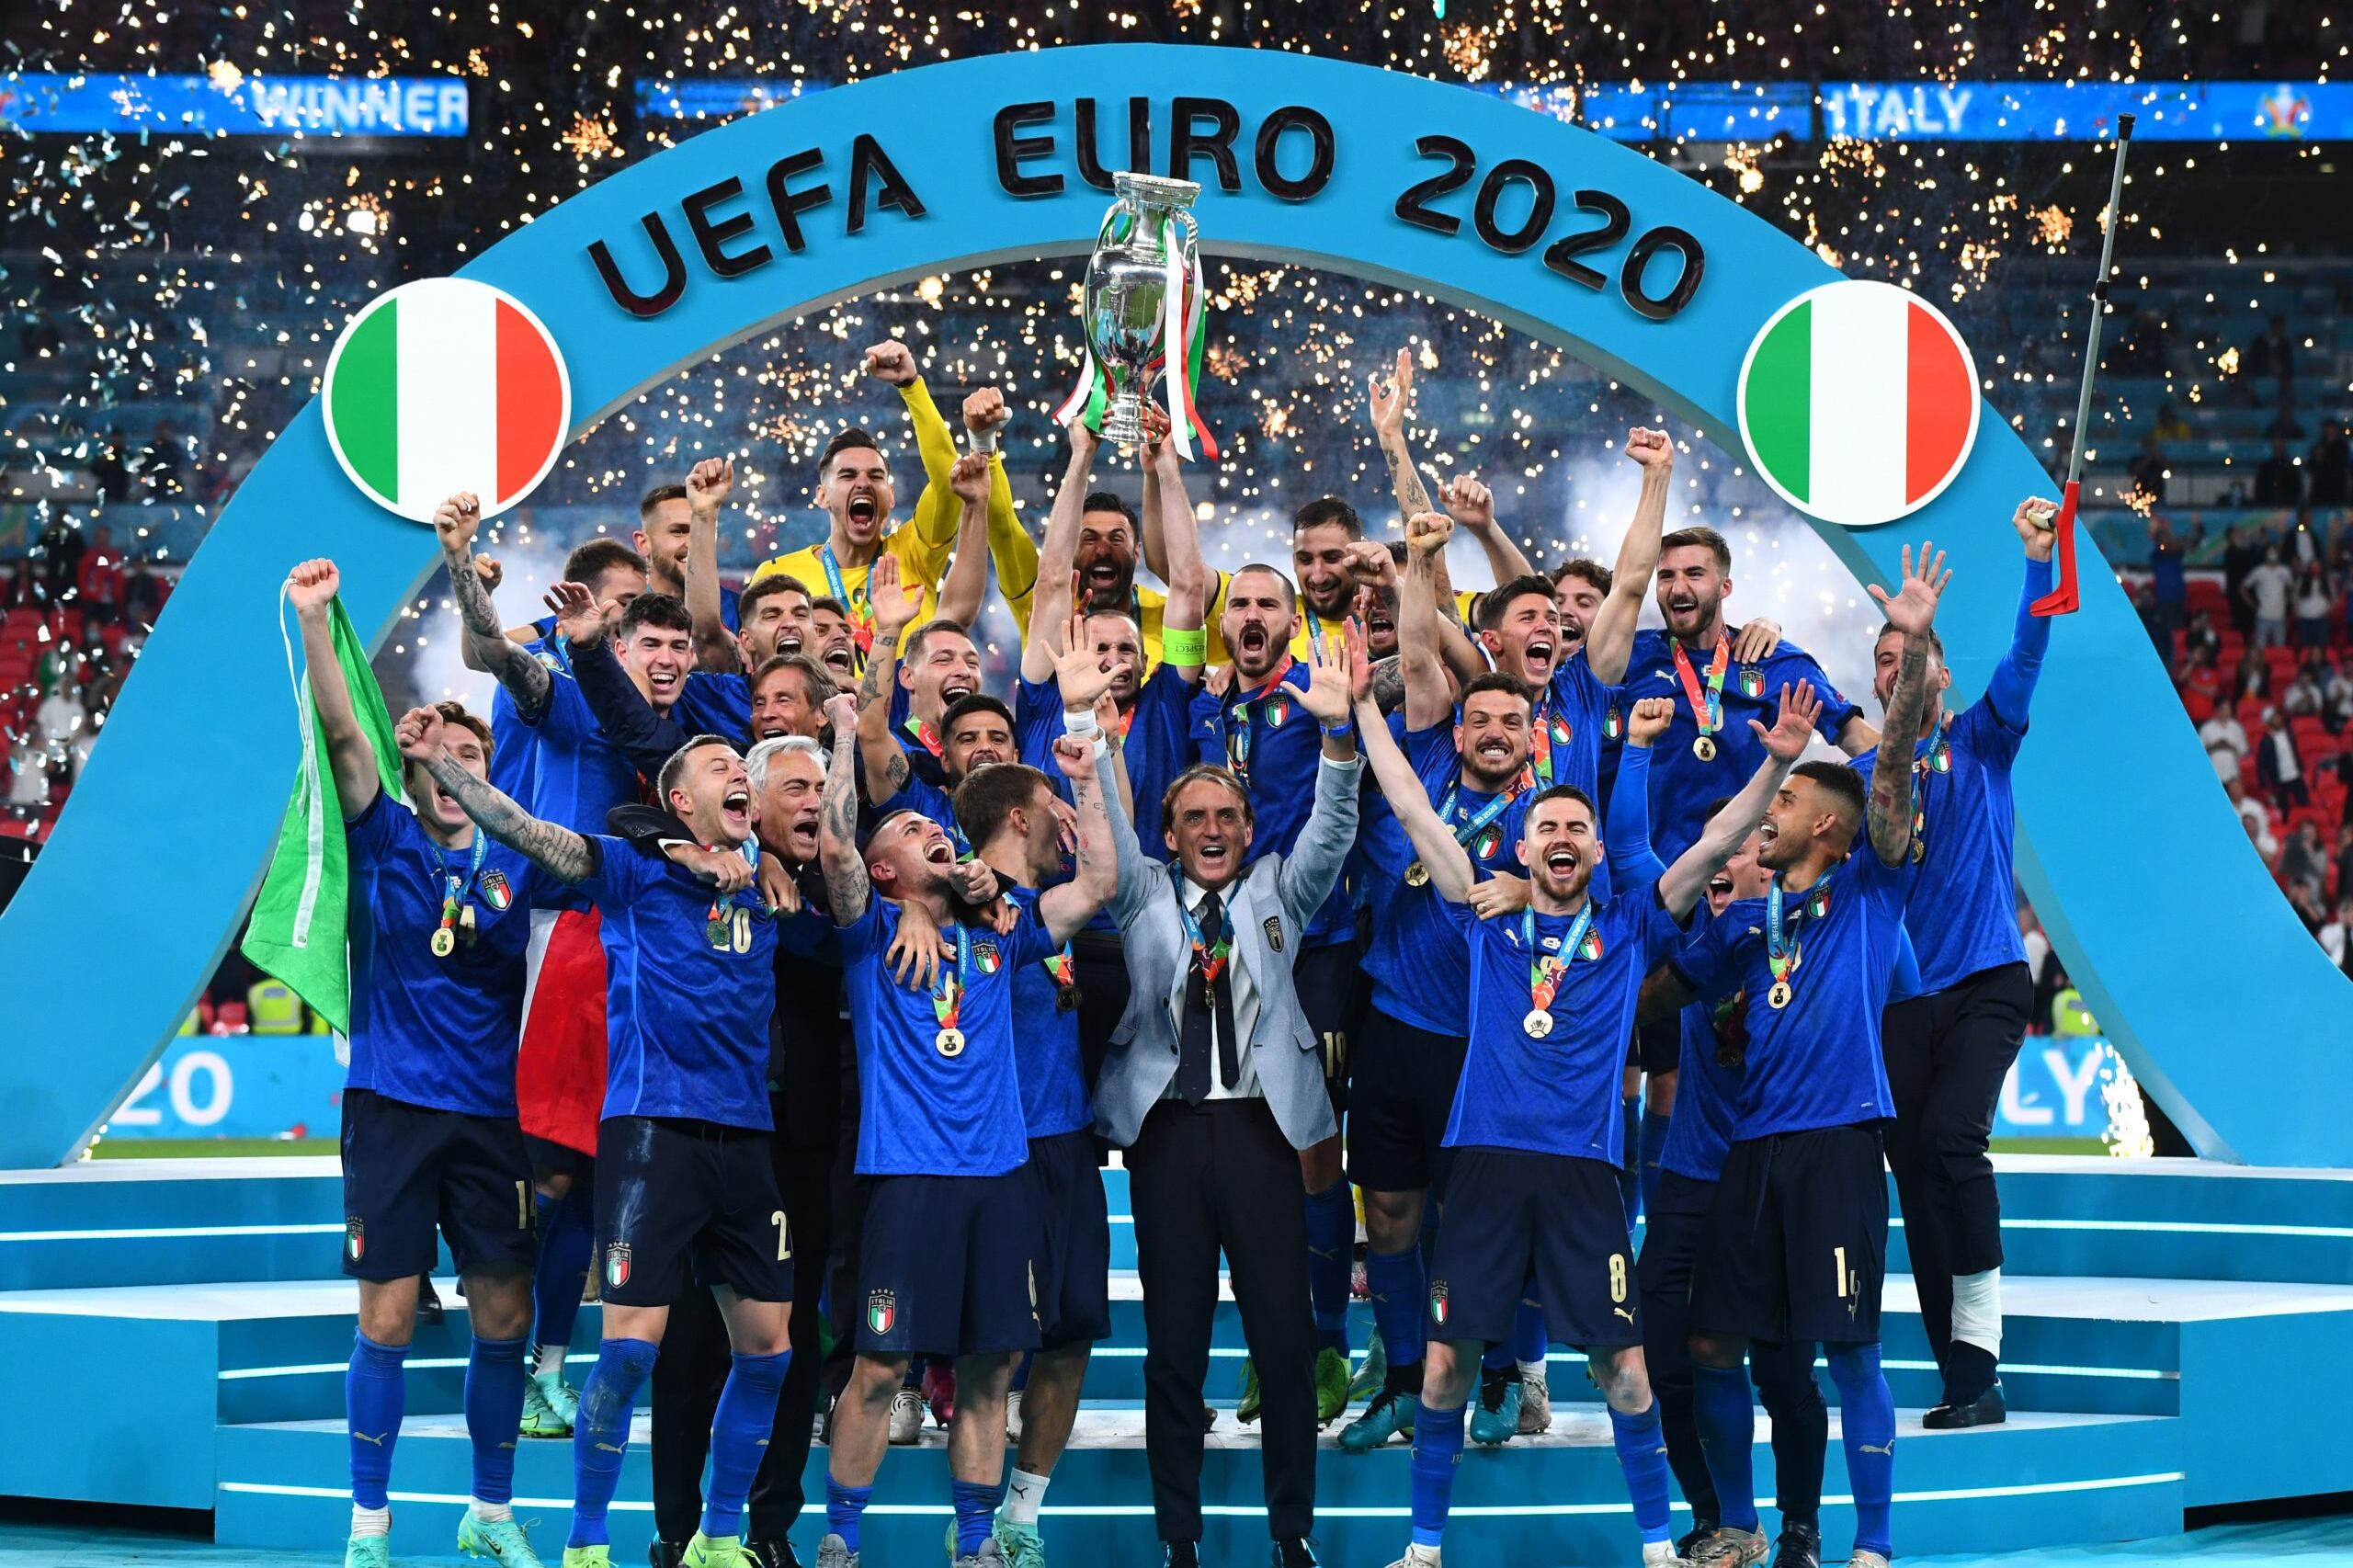 How many wins left for Belgium to match Euro 2020 winner Italy's record against them